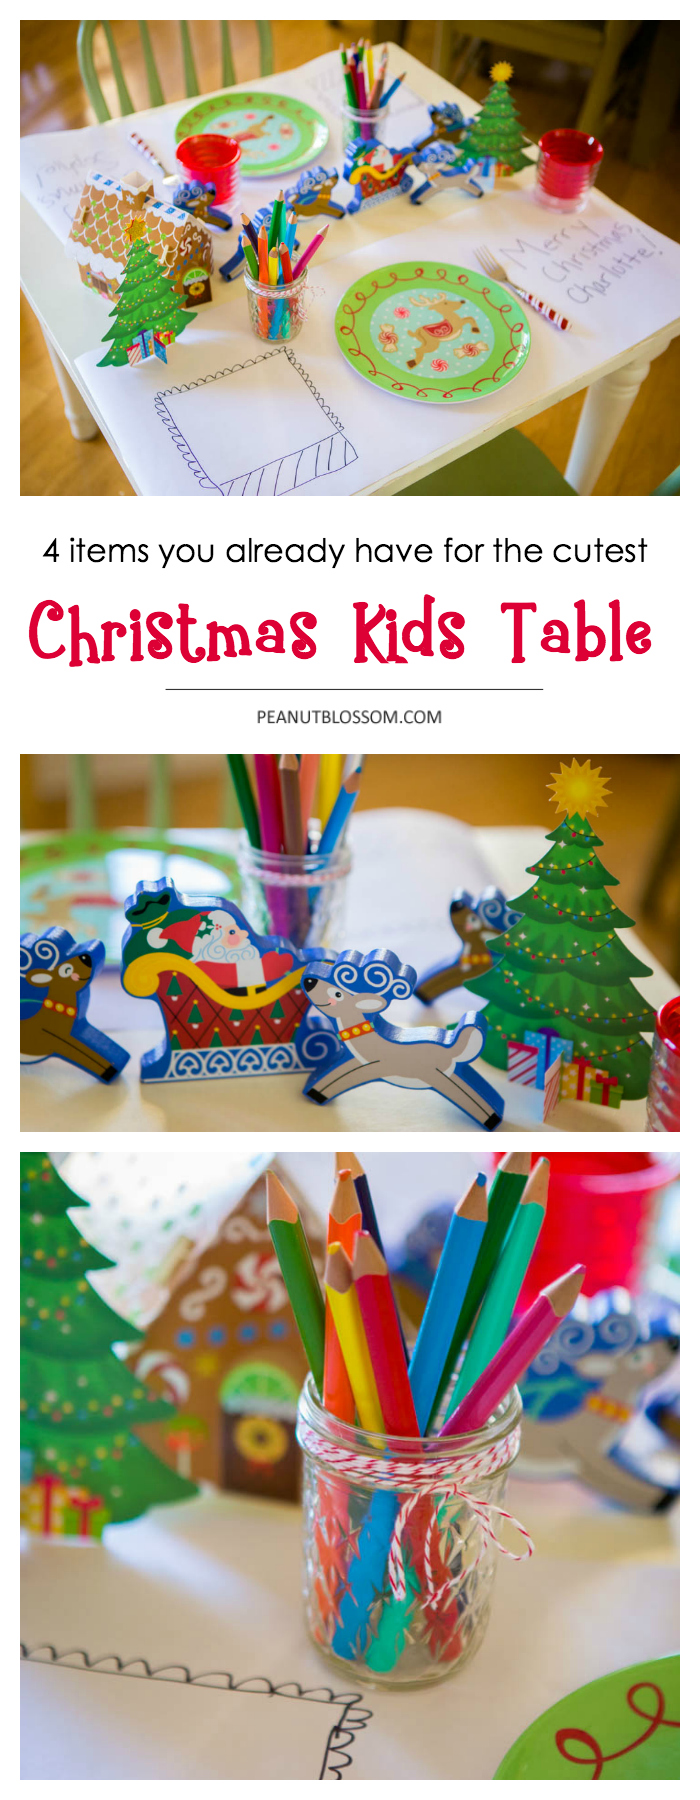 4 things you already have at home for the cutest Christmas kids table